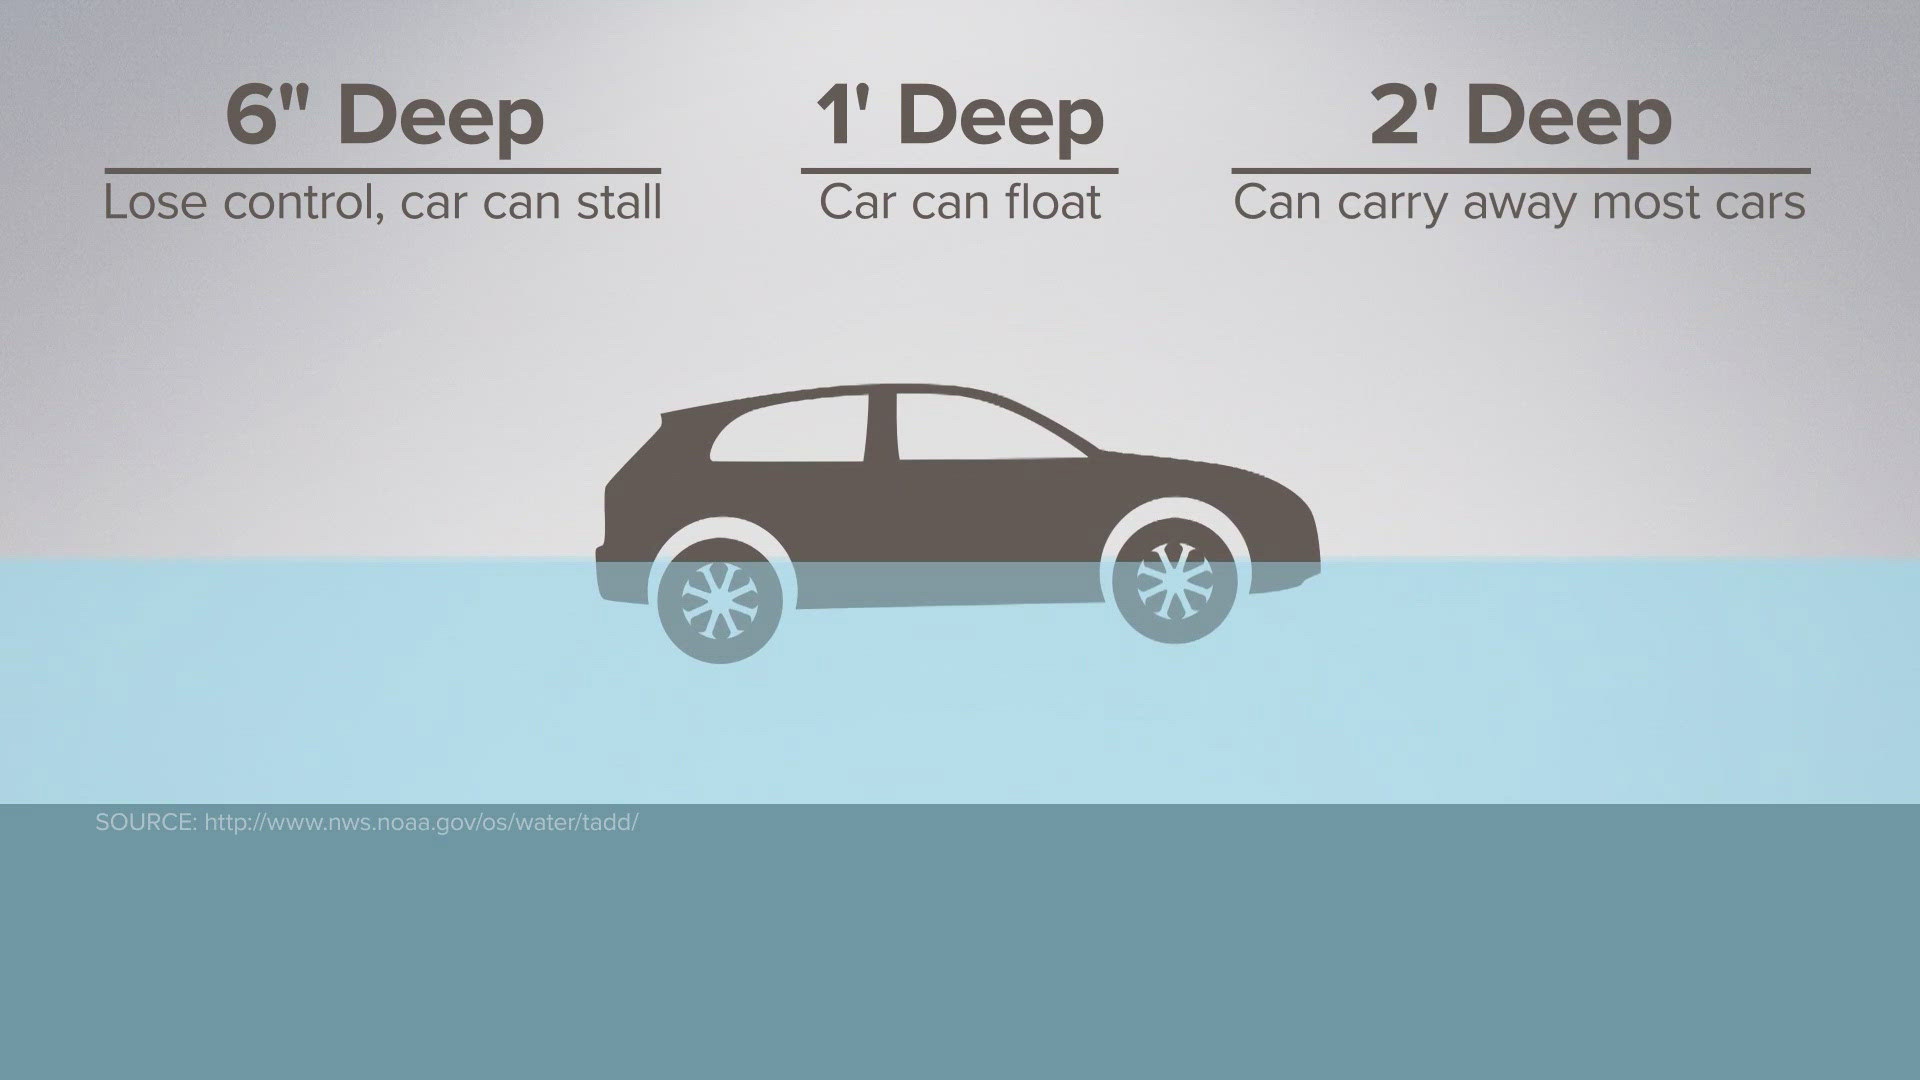 Turn around, don't drown. It's solid advice and this drives the point home!